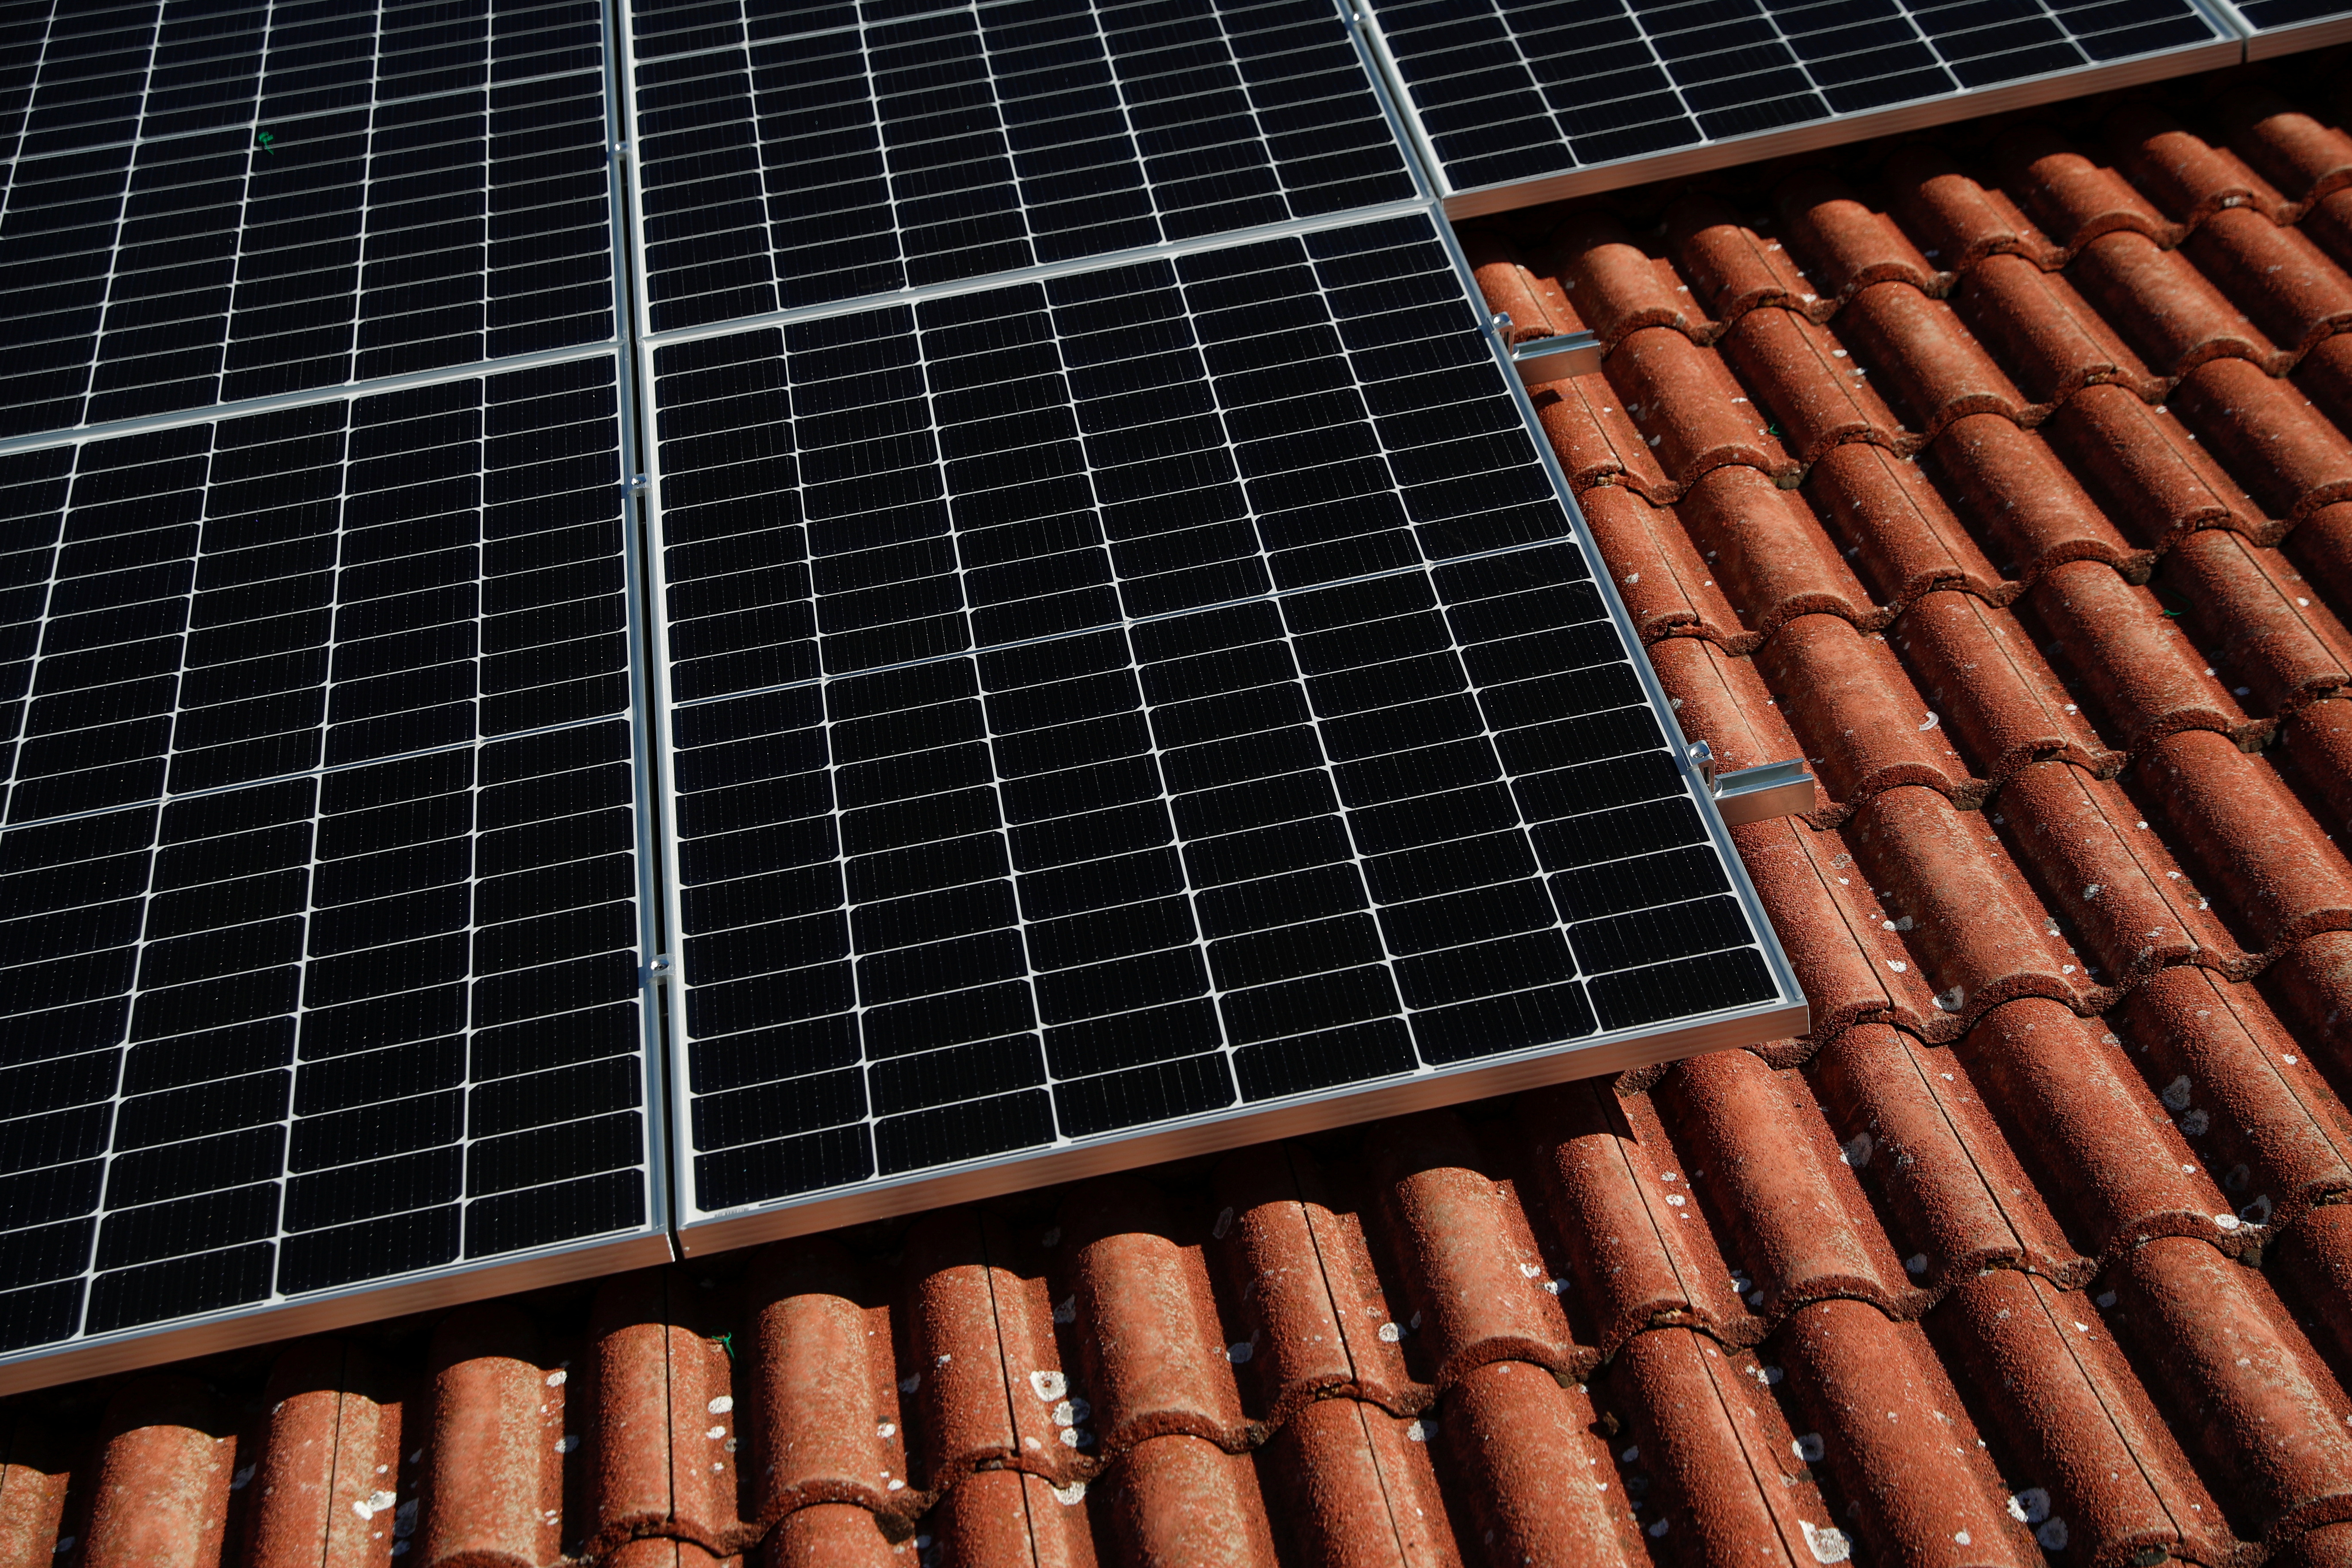 Solar panel installation on the roof of a home in Algete